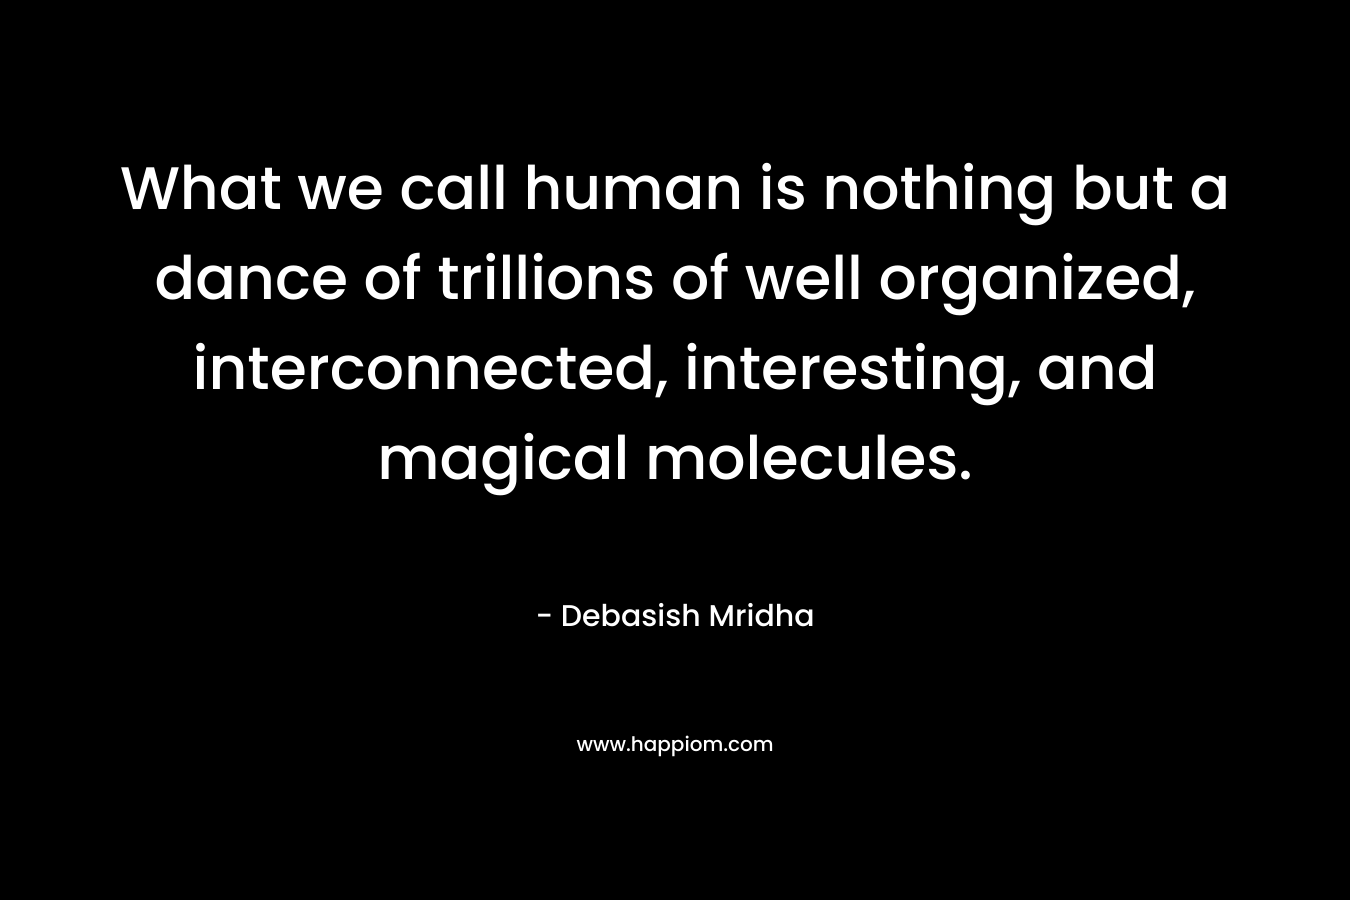 What we call human is nothing but a dance of trillions of well organized, interconnected, interesting, and magical molecules. – Debasish Mridha